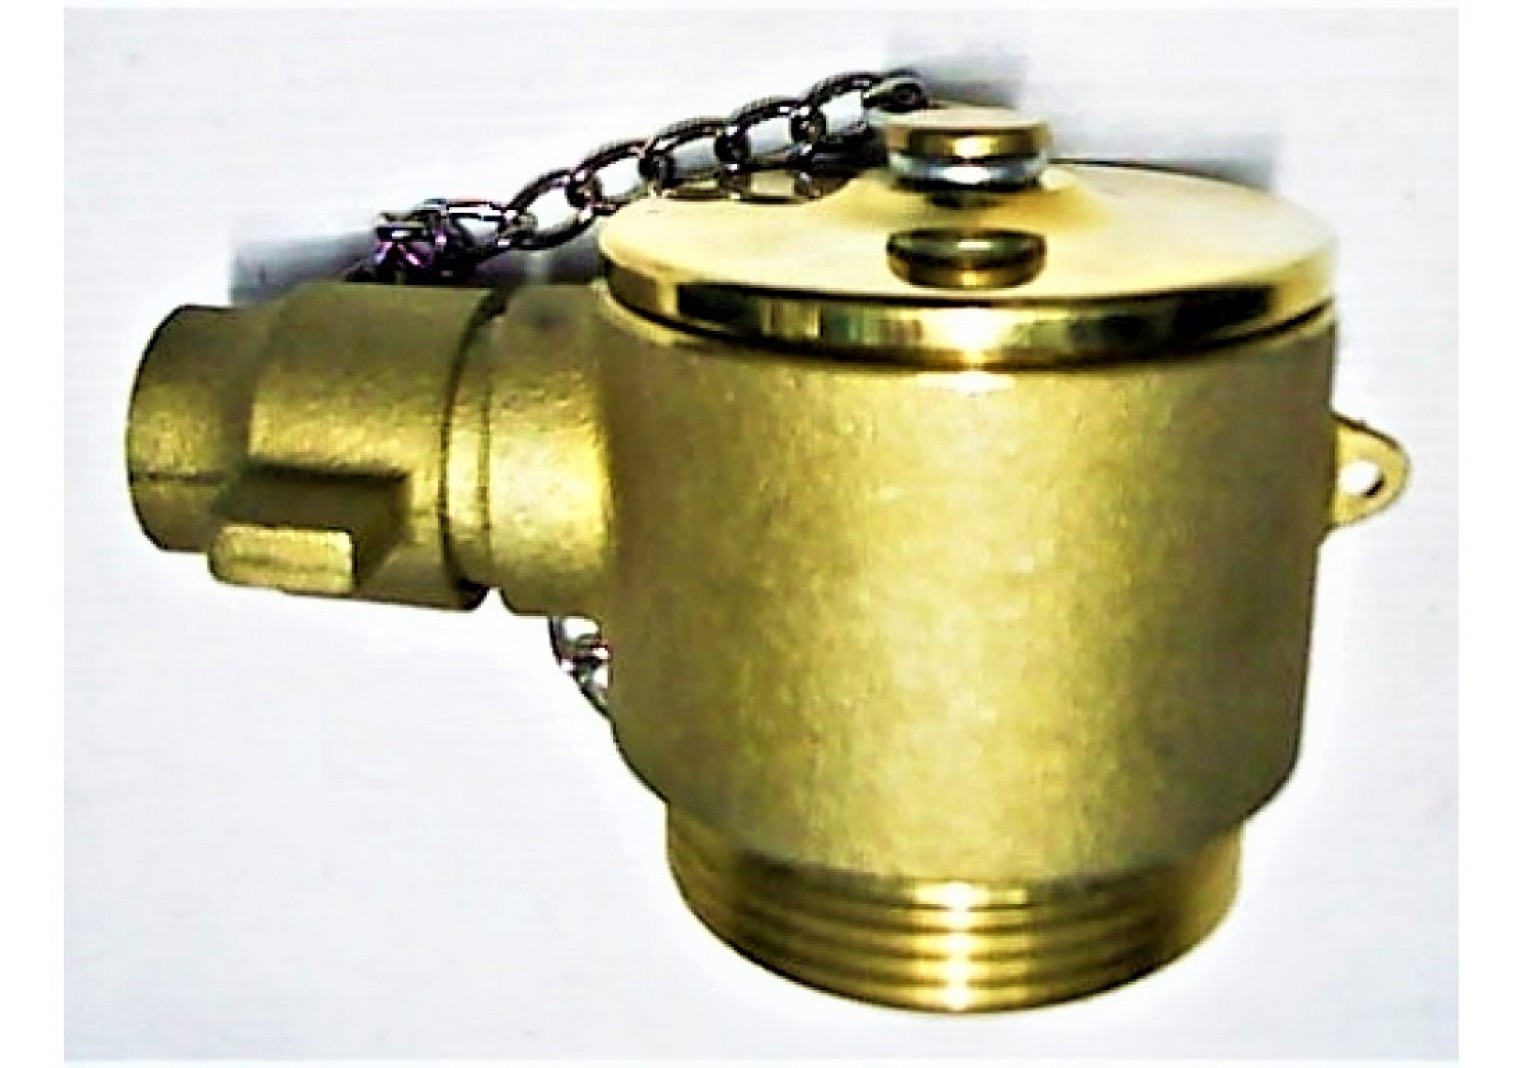 Brass QUICK COUPLING ADAPTOR WITH CAP CHAIN 2.5 inch.